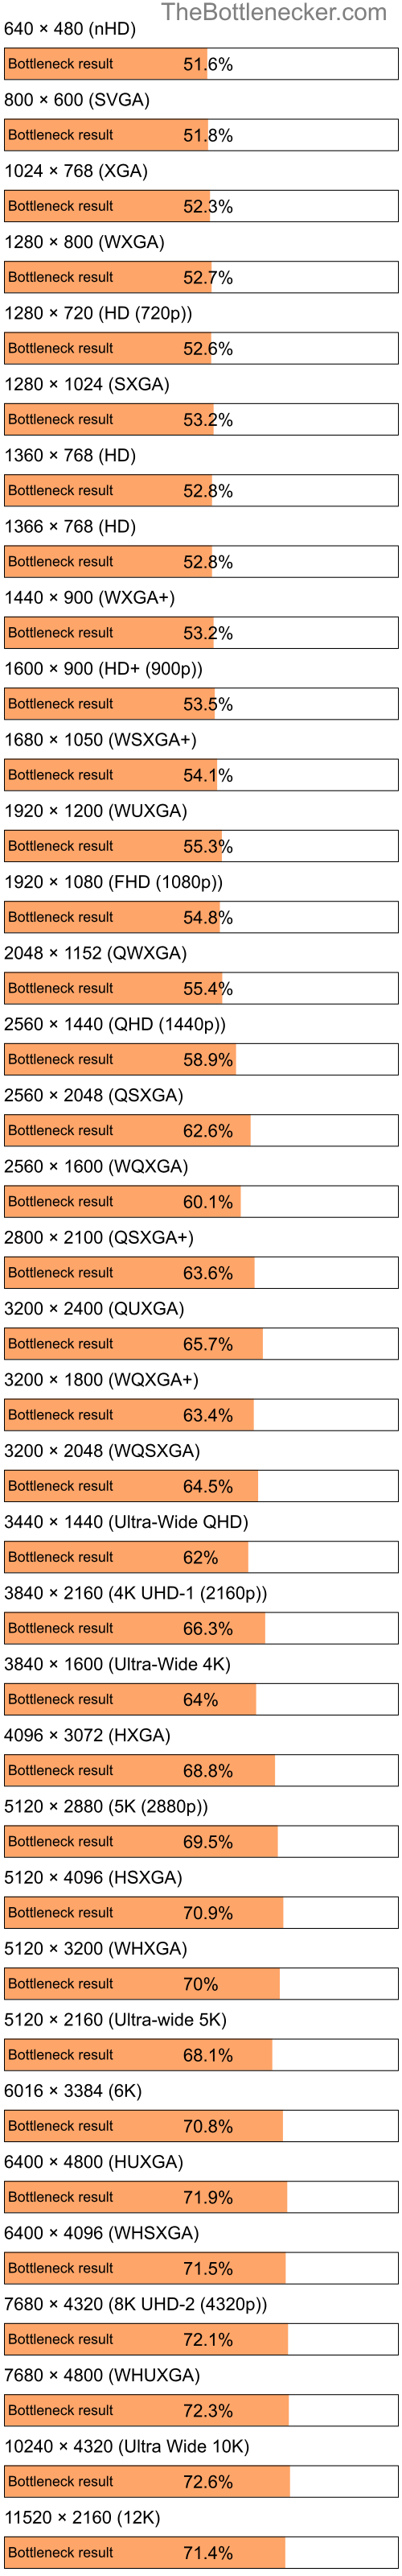 Bottleneck results by resolution for Intel Pentium 4 and AMD Radeon X1600 Pro in Processor Intense Tasks